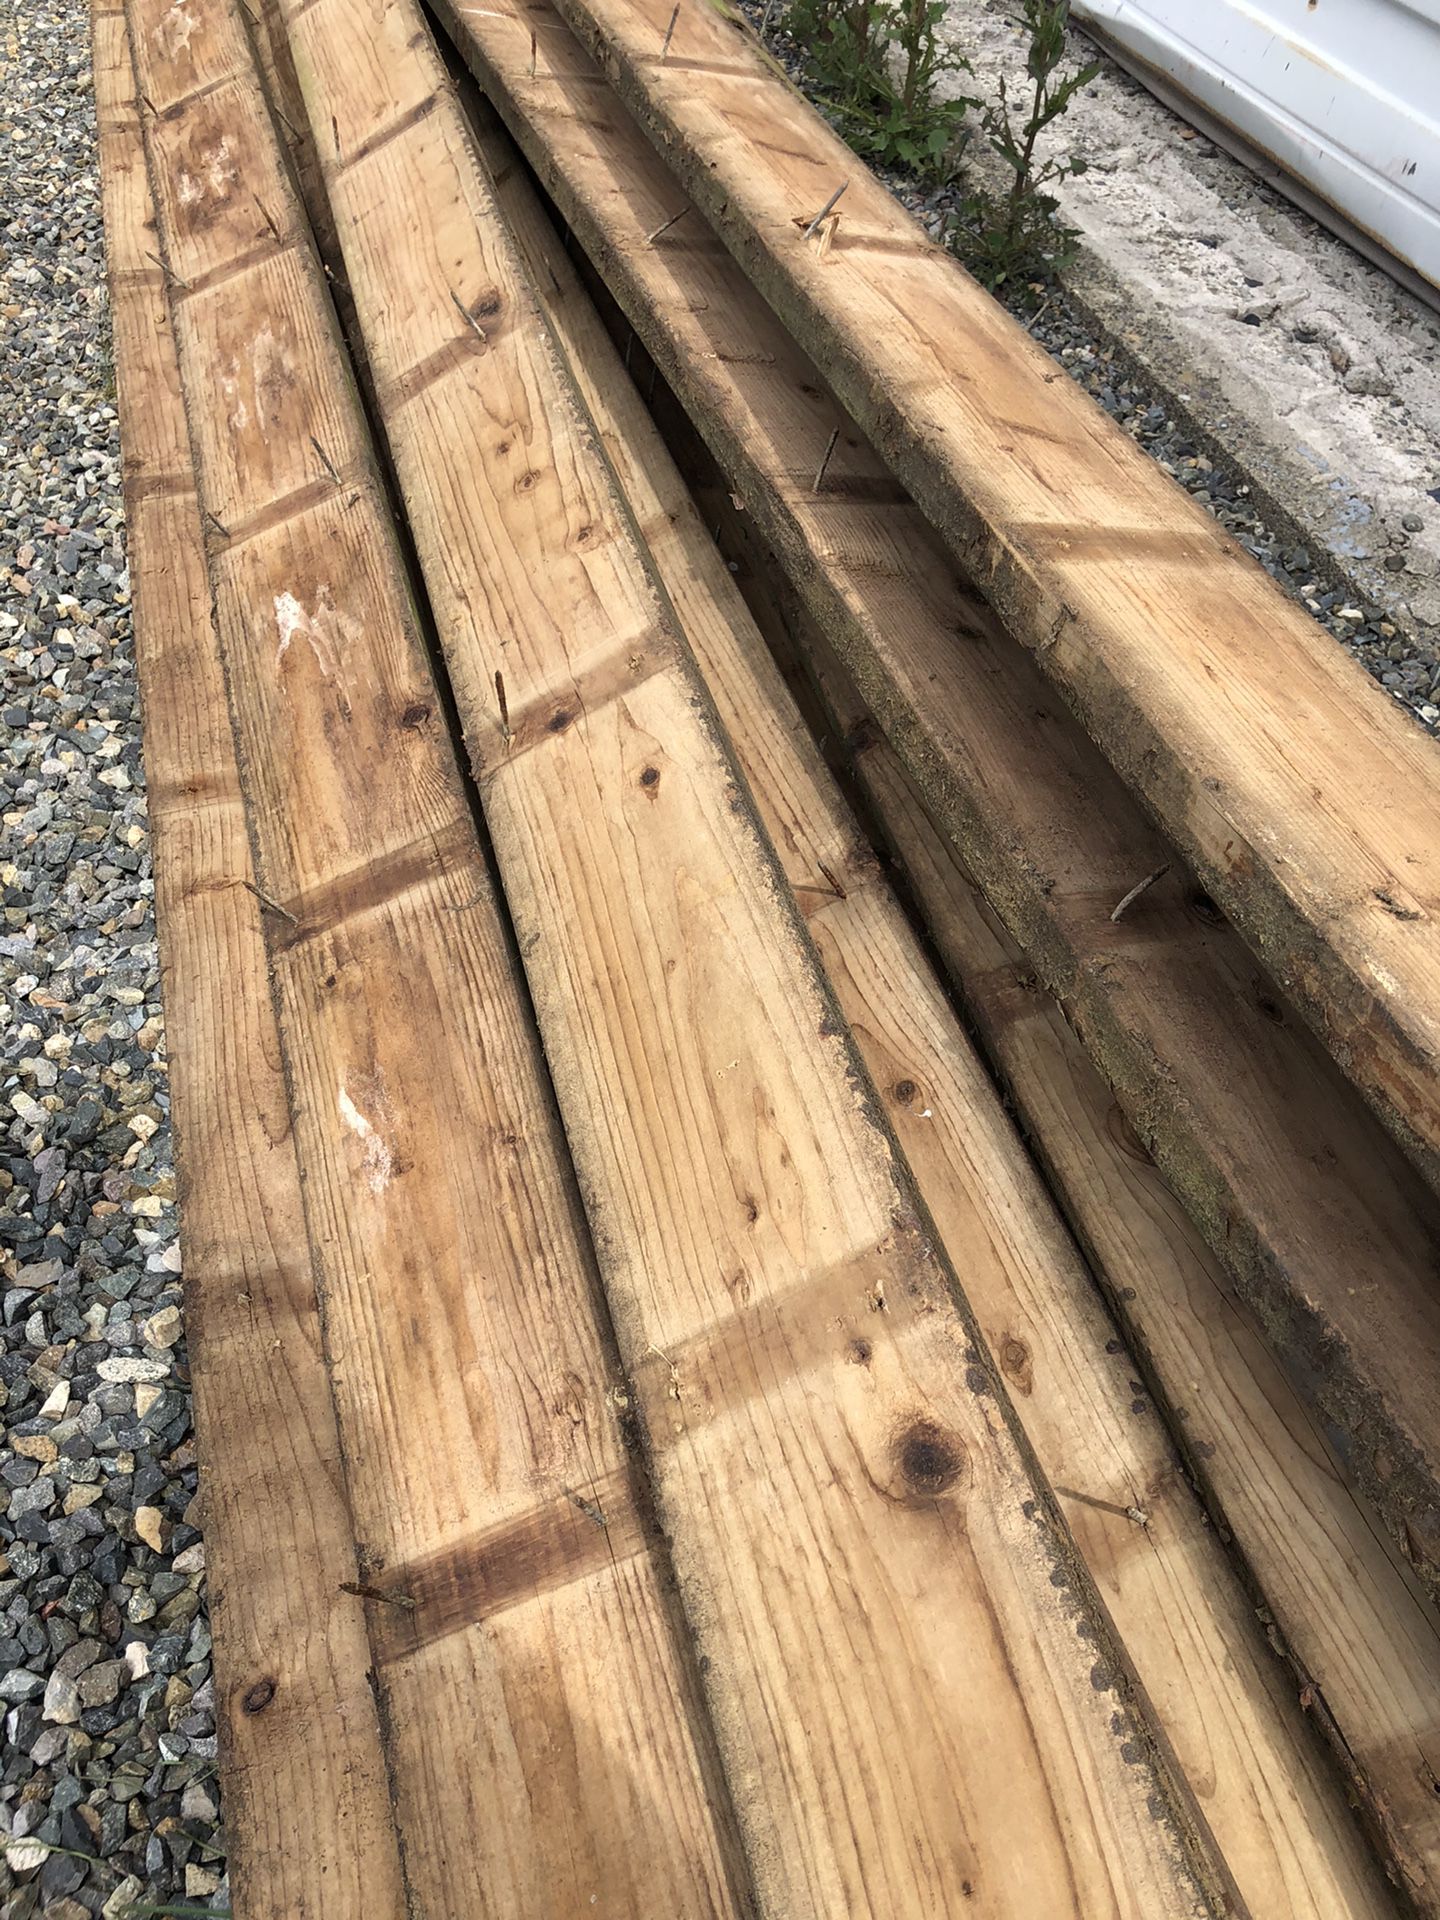 Used 2x6 Deck Boards Approx 20 19 And 5 Shorter Ones Not Pressure